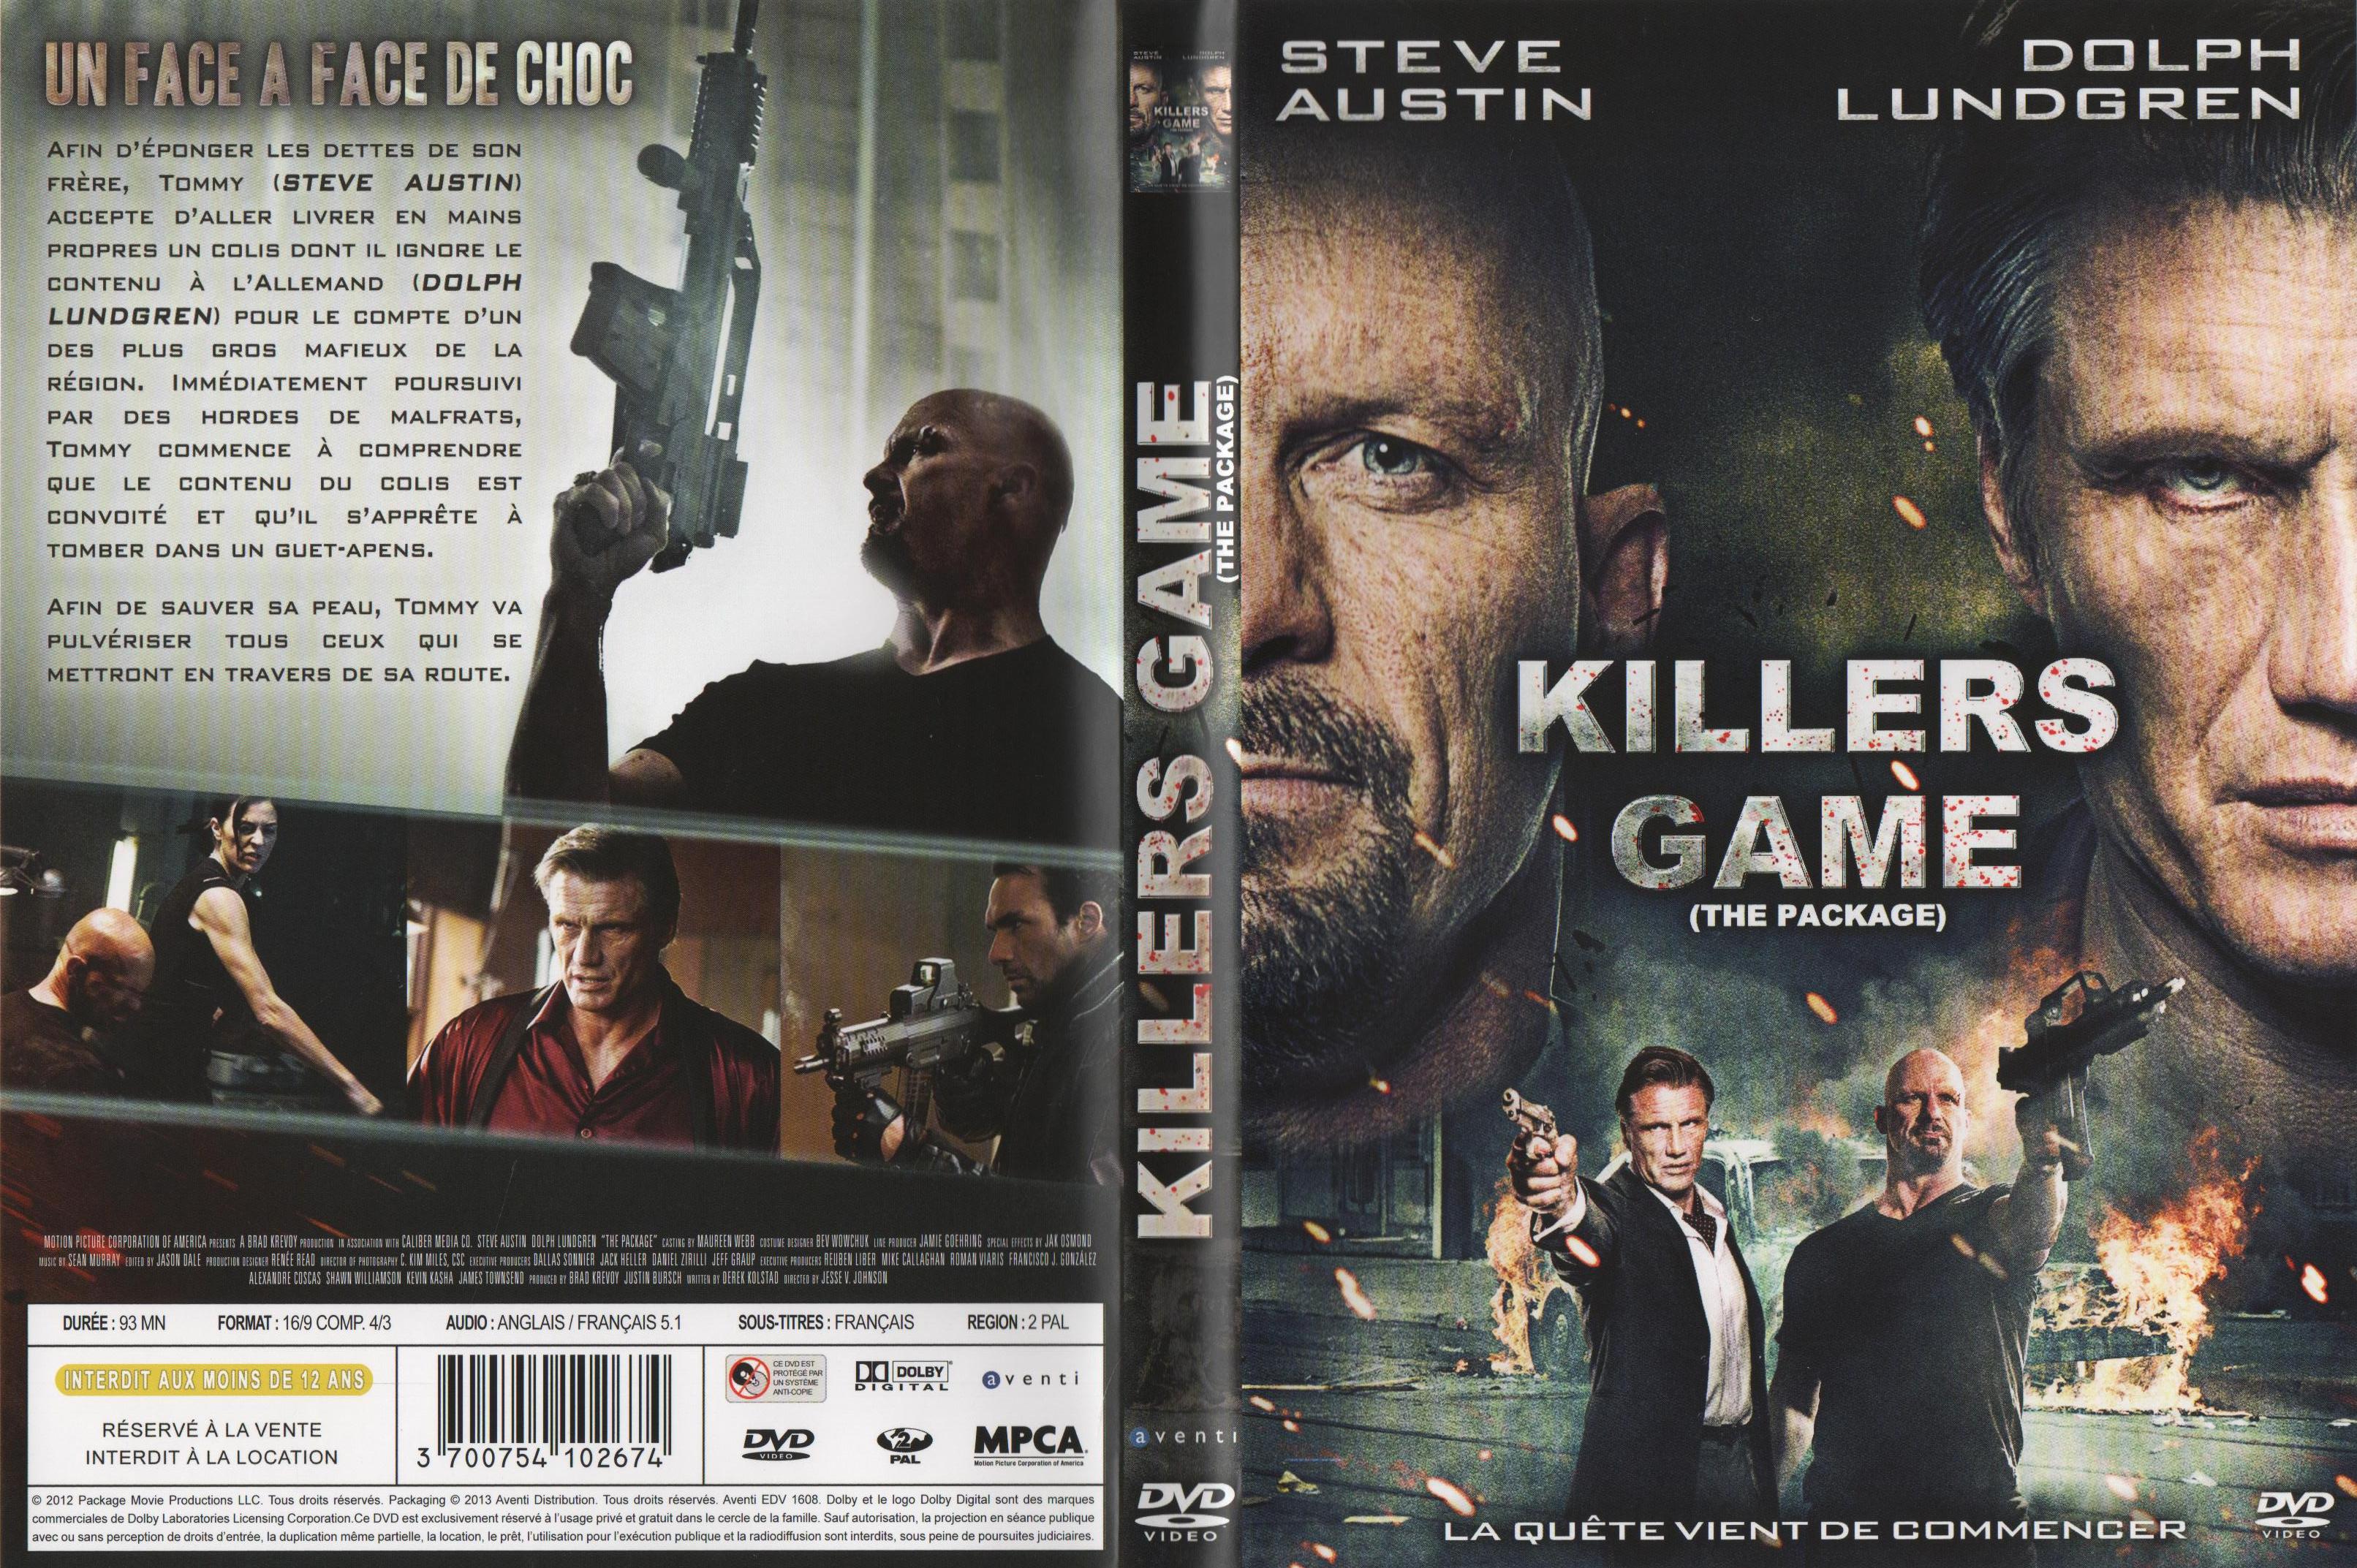 Jaquette DVD Killers game